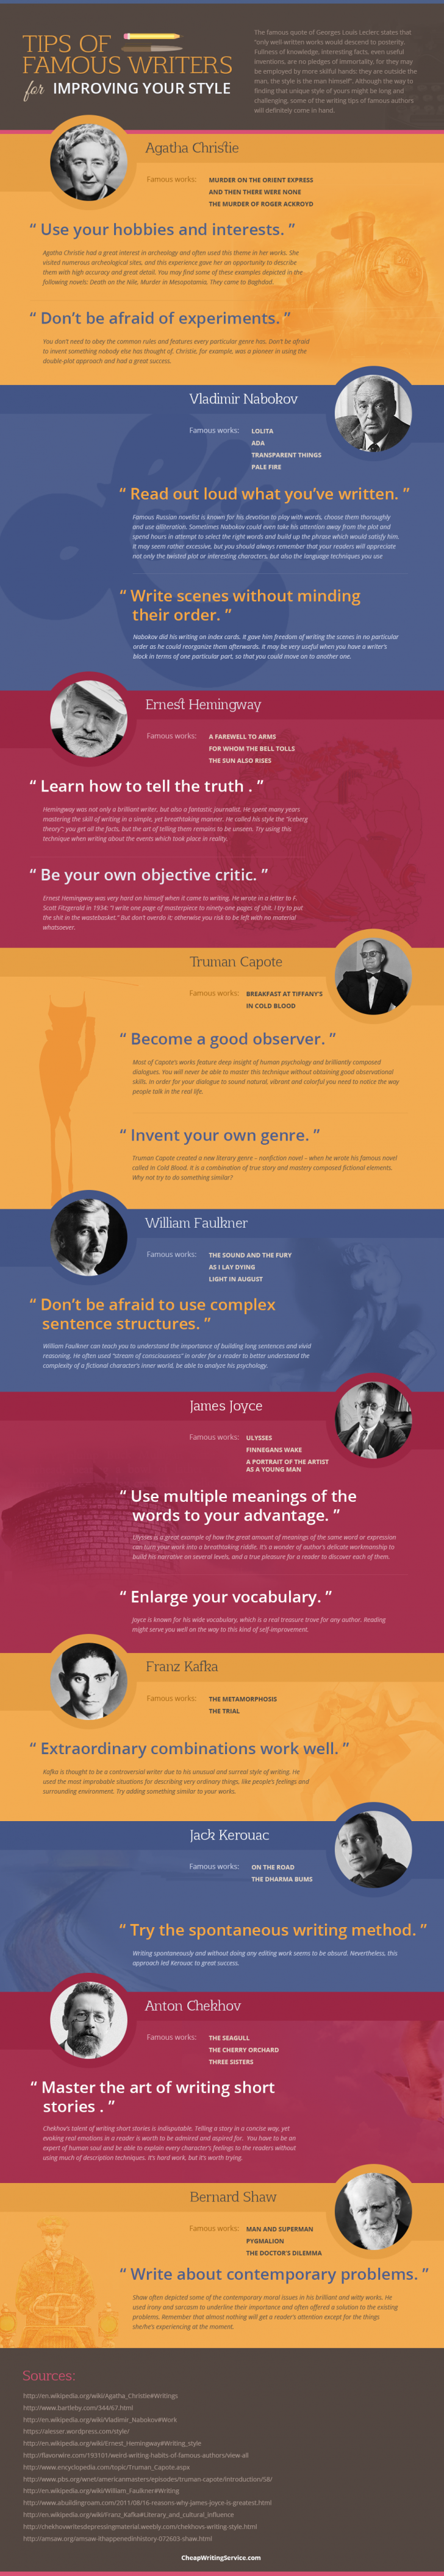 Tips+of+Famous+Writers+for+Improving+Your+Style+%28Infographic%29